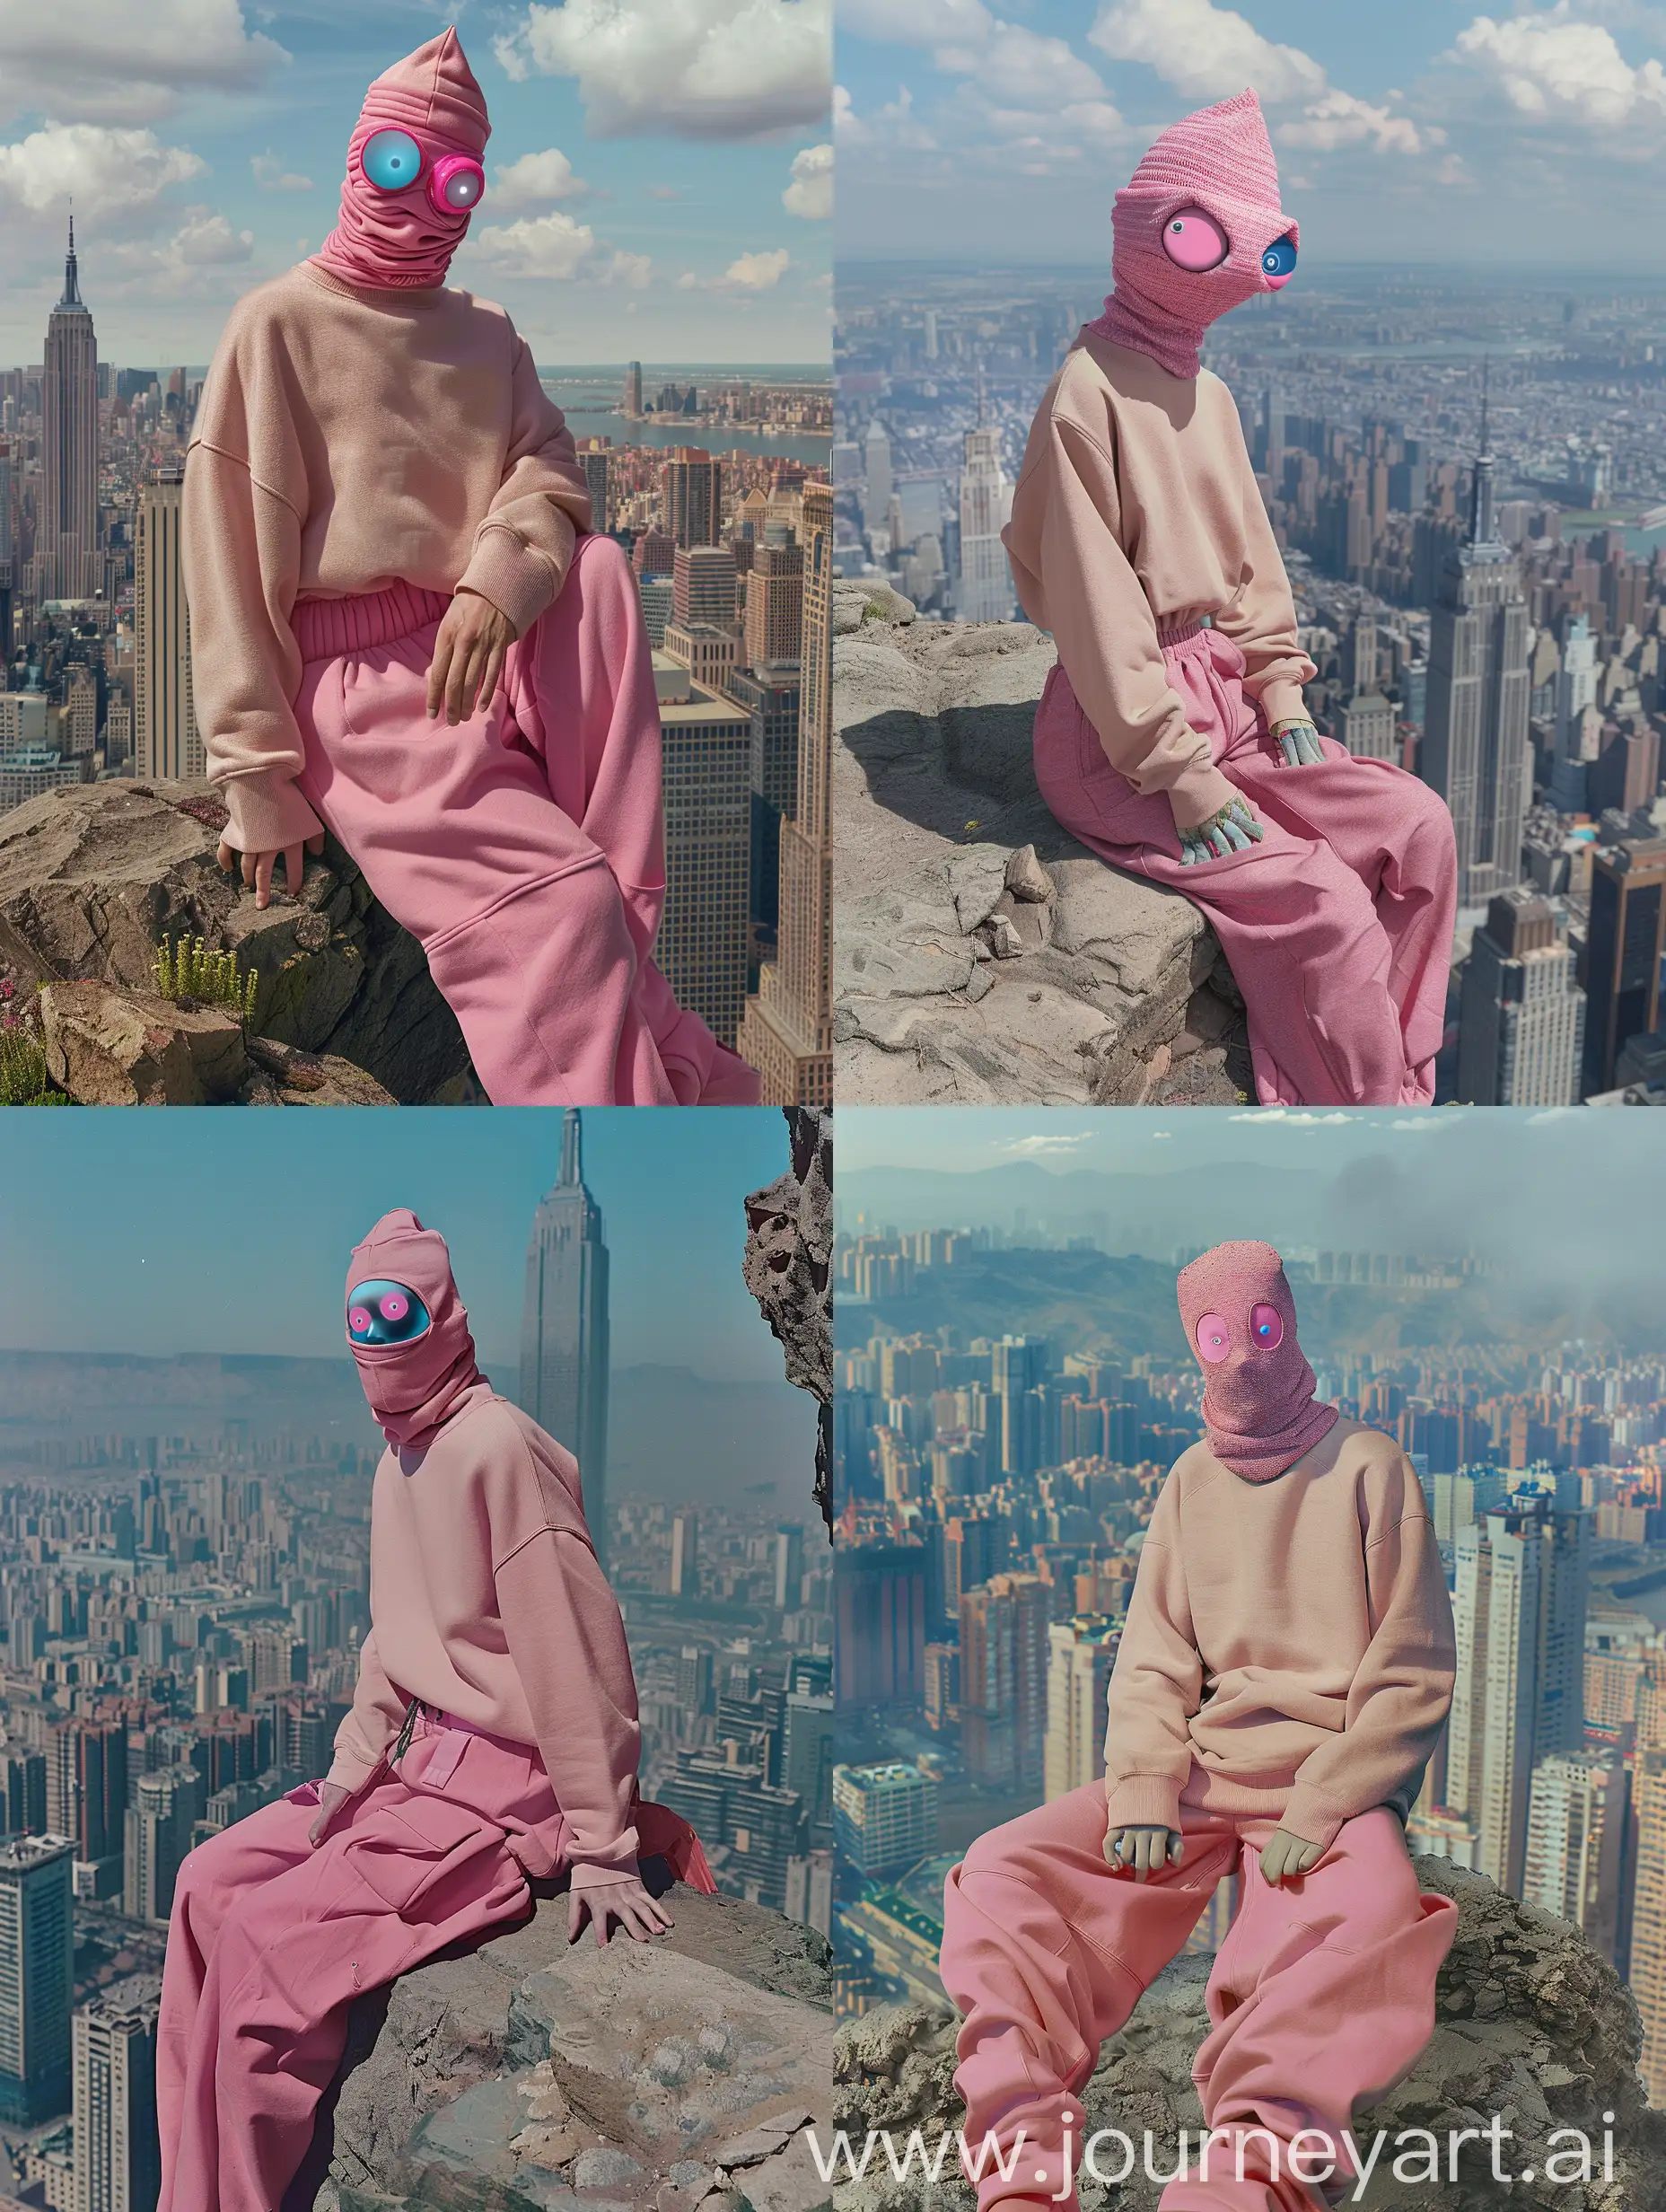 Urban-Contemplation-Individual-in-Pink-Sweatshirt-on-Cliff-Overlooking-Cityscape